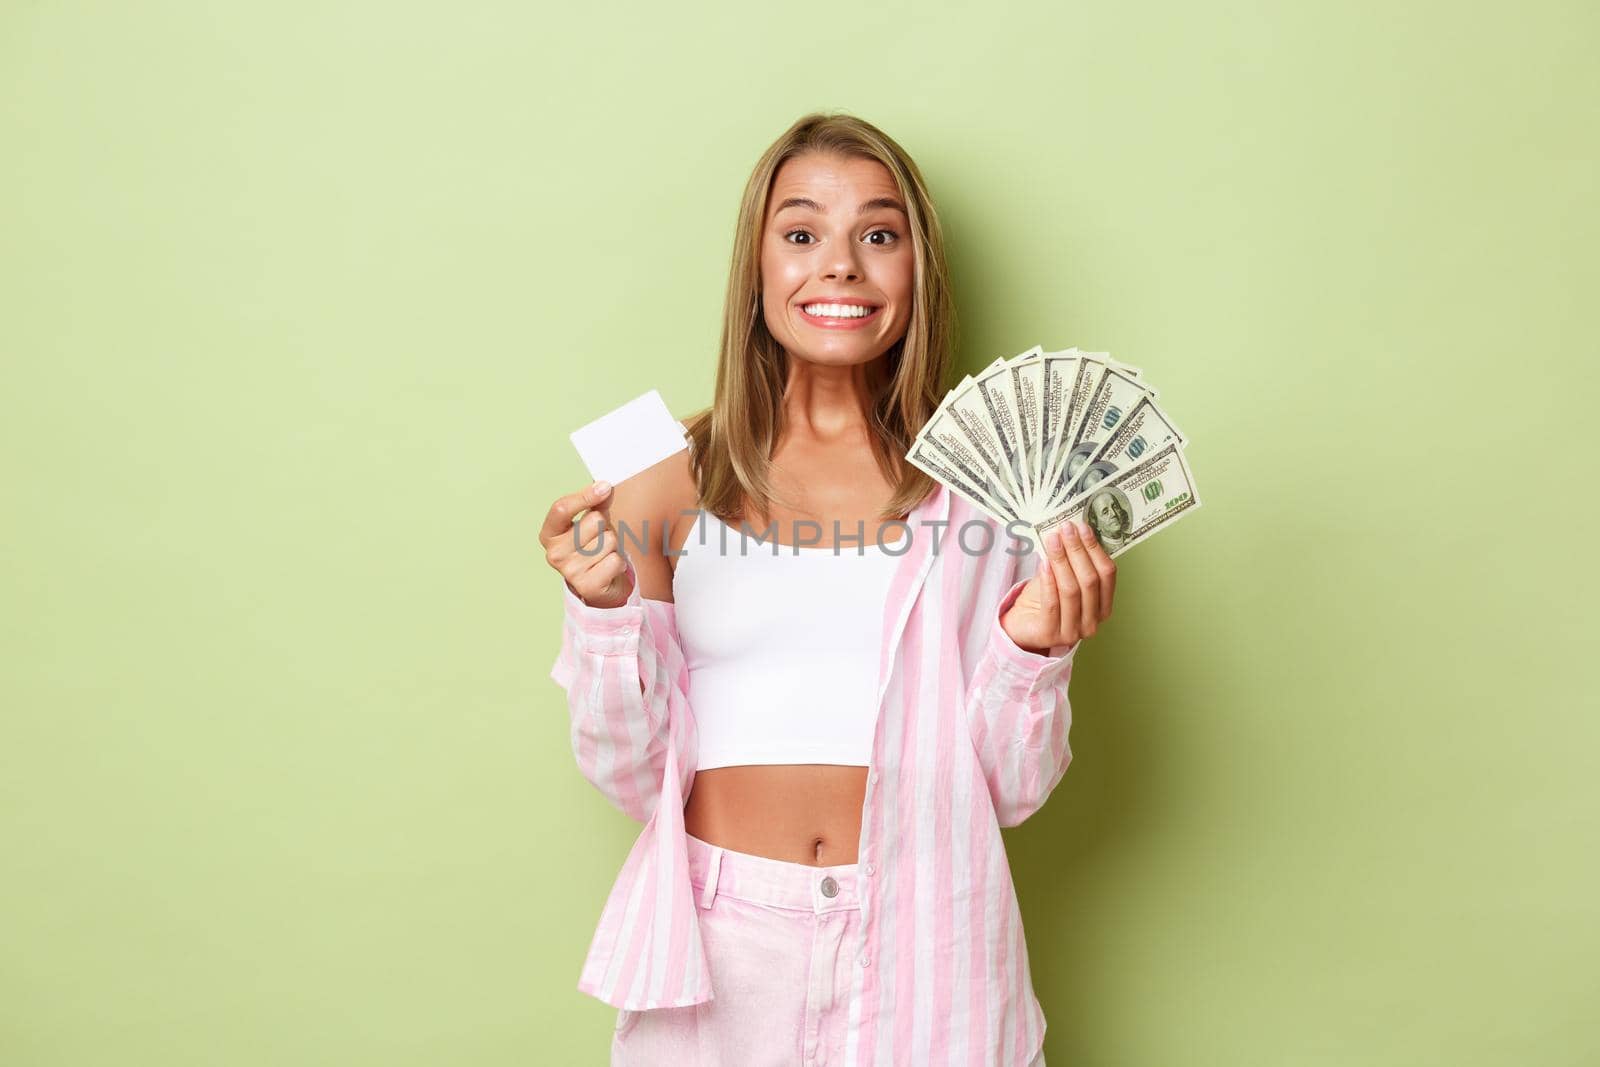 Image of successful blond woman in pink shirt, showing credit card and money, smiling happy, standing over green background.